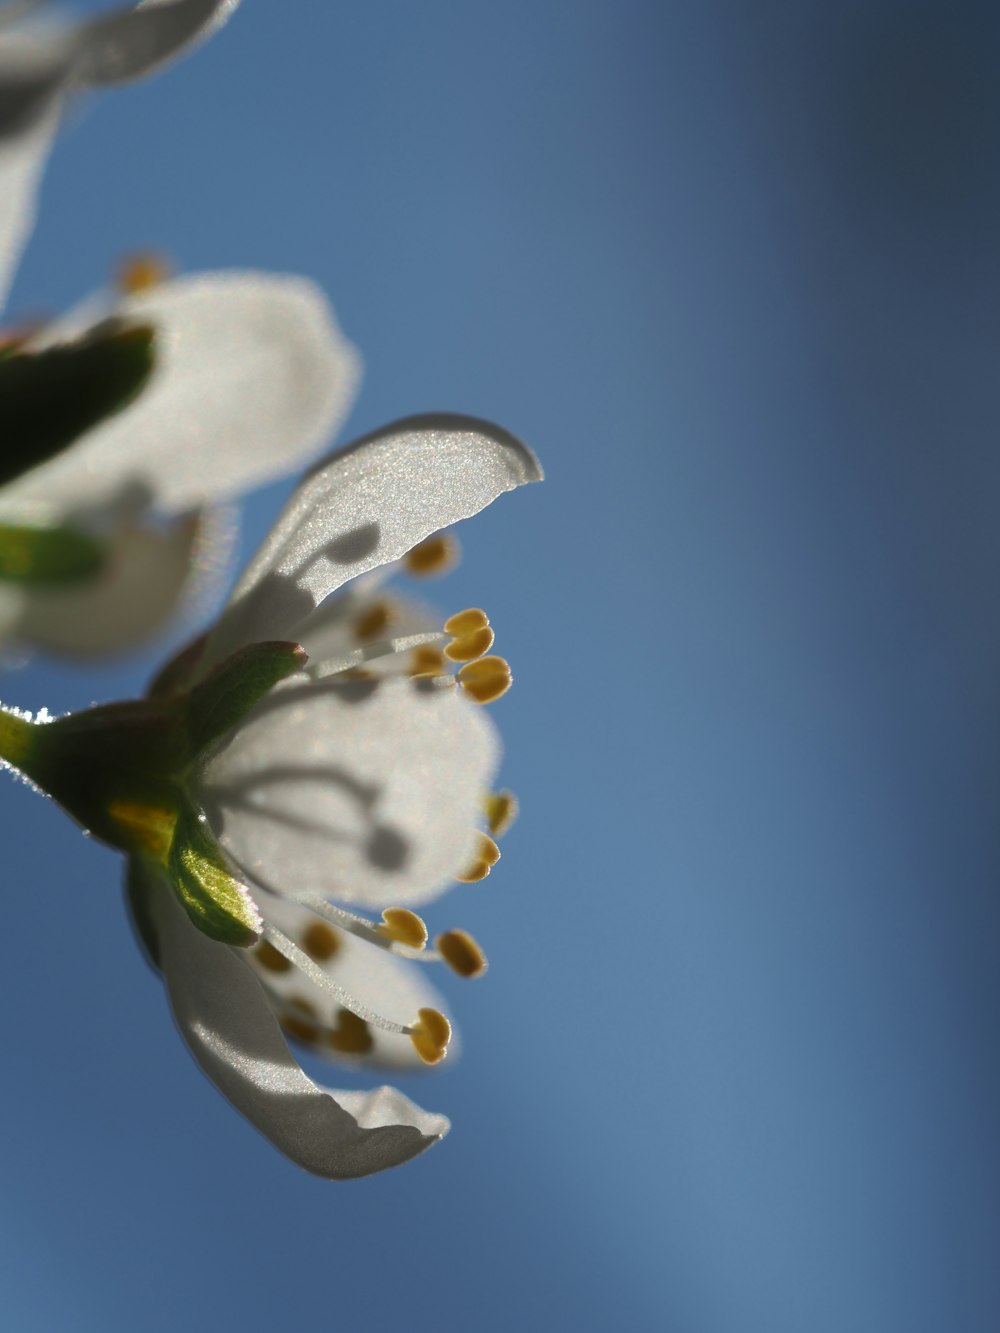 a close up of a flower with a blue sky in the background